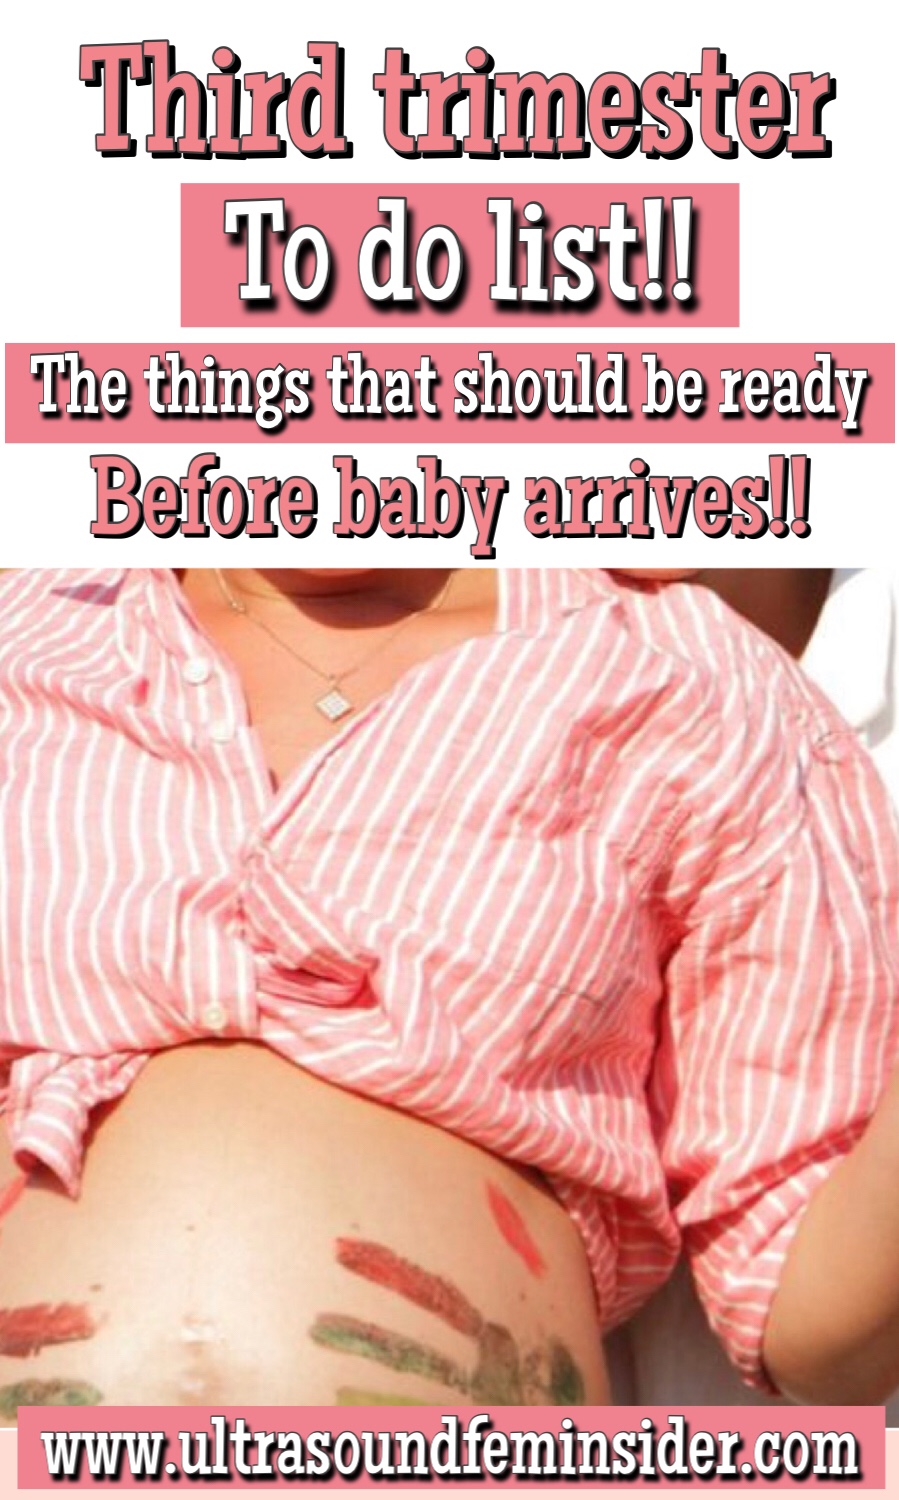 Pregnancy tips for first time moms. Third trimester to do list. 